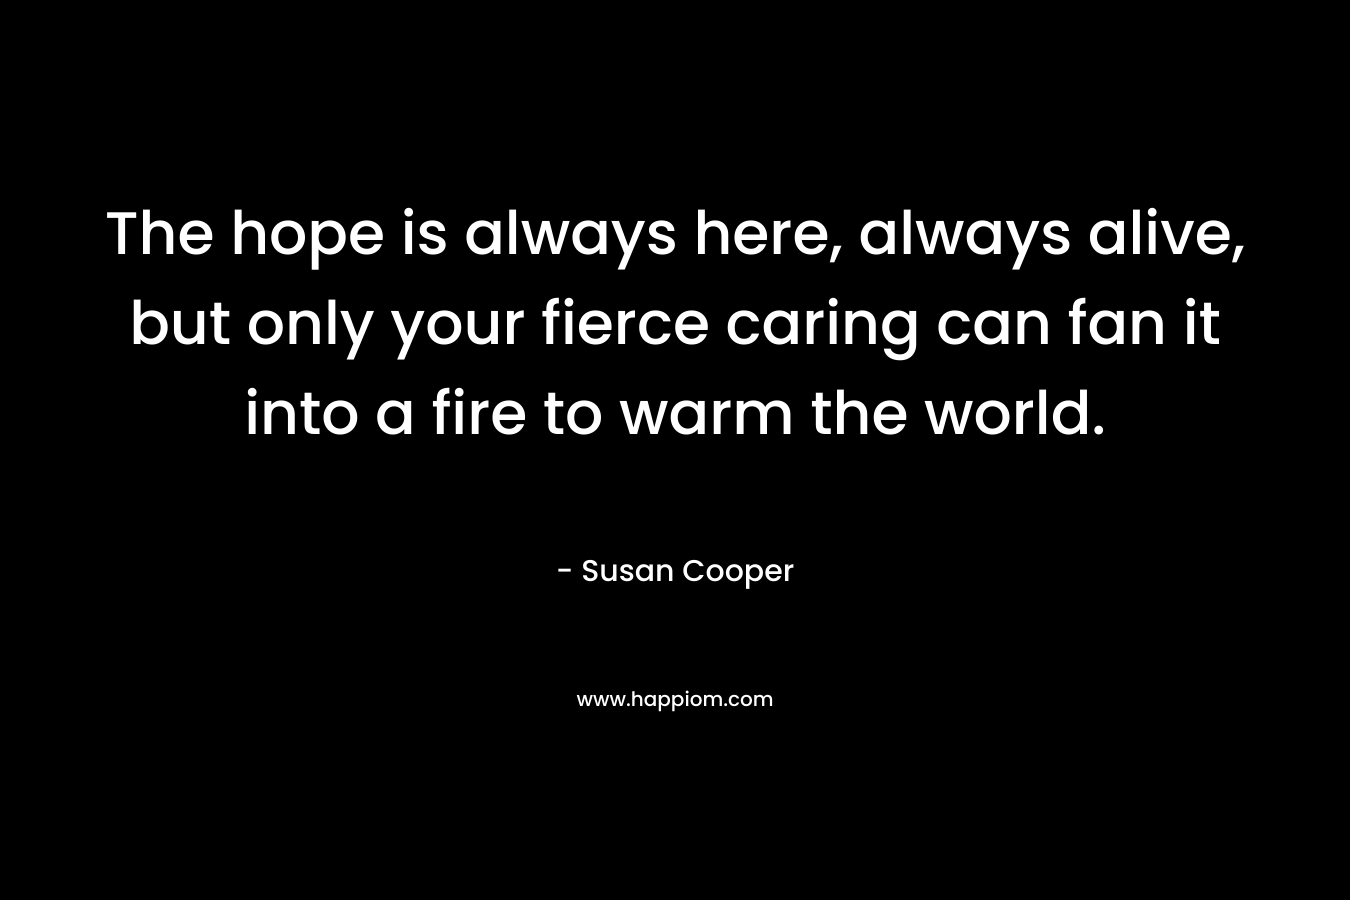 The hope is always here, always alive, but only your fierce caring can fan it into a fire to warm the world. – Susan Cooper